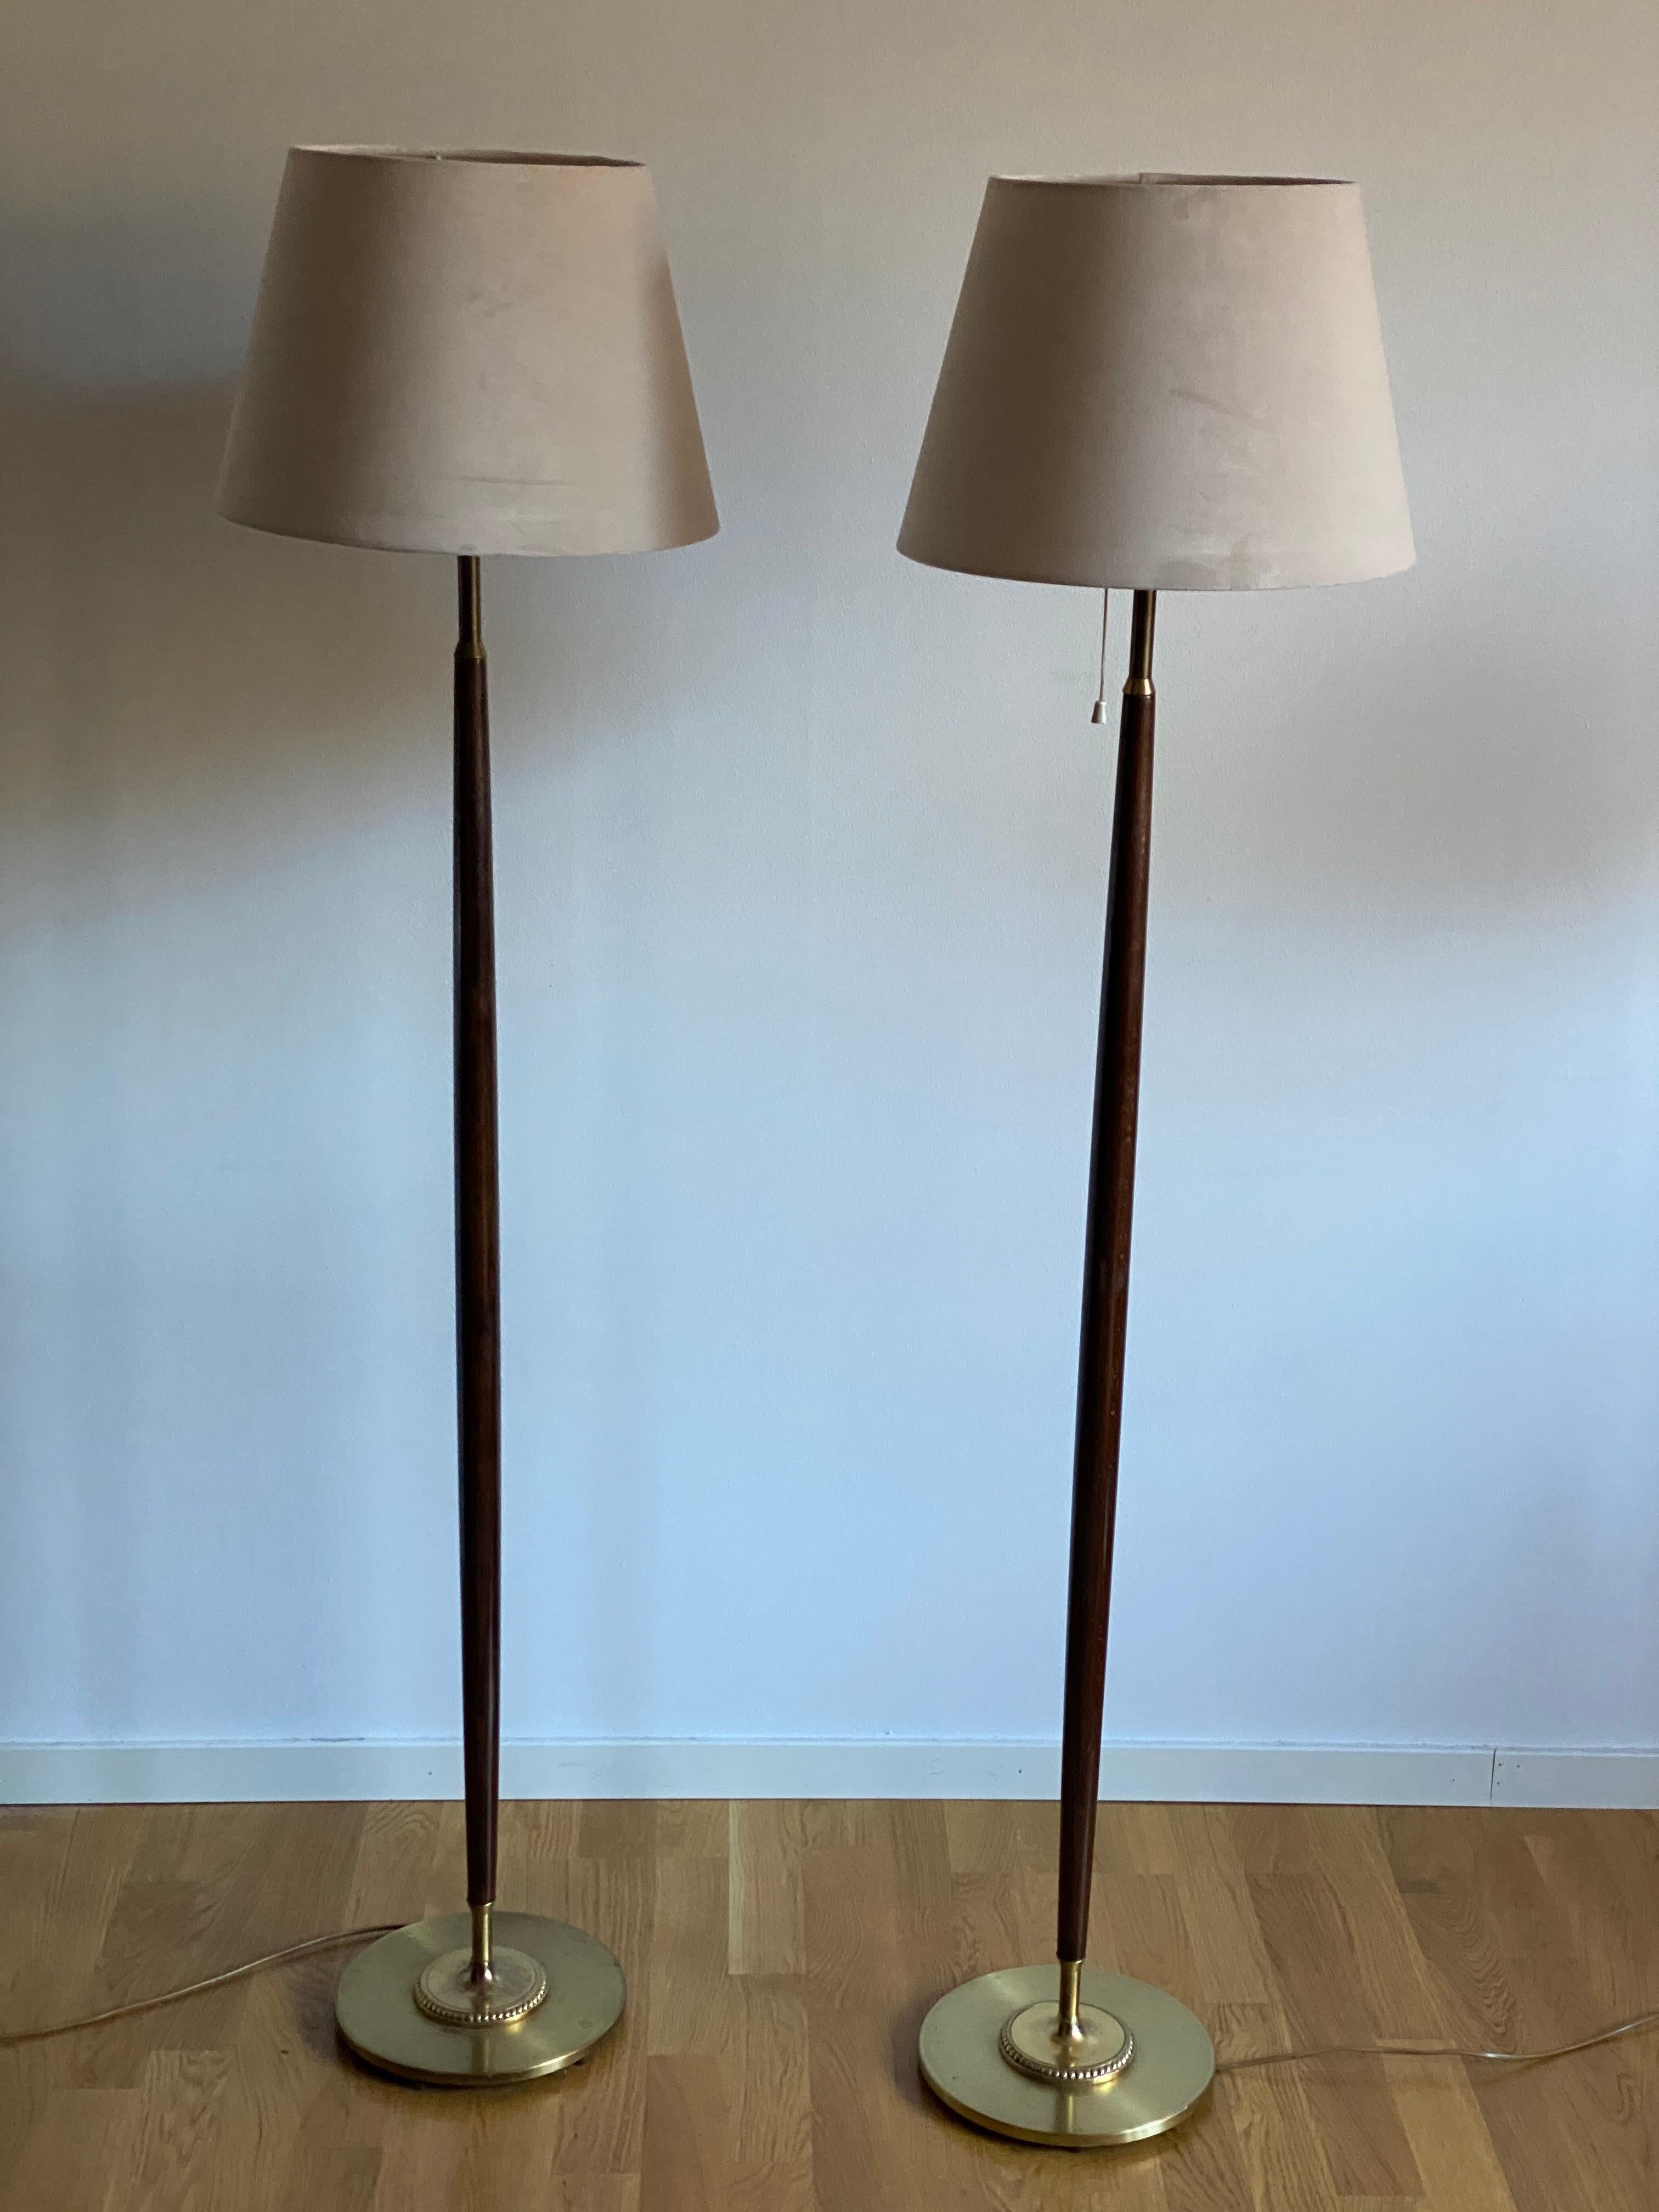 A pair of all-original functionalist floor lamps. Produced by Falkenbergs Belysning. All original condition. Stained walnut and brass.

Lampshades are attached for illustration and not included in the purchase. Dimensions stated are without